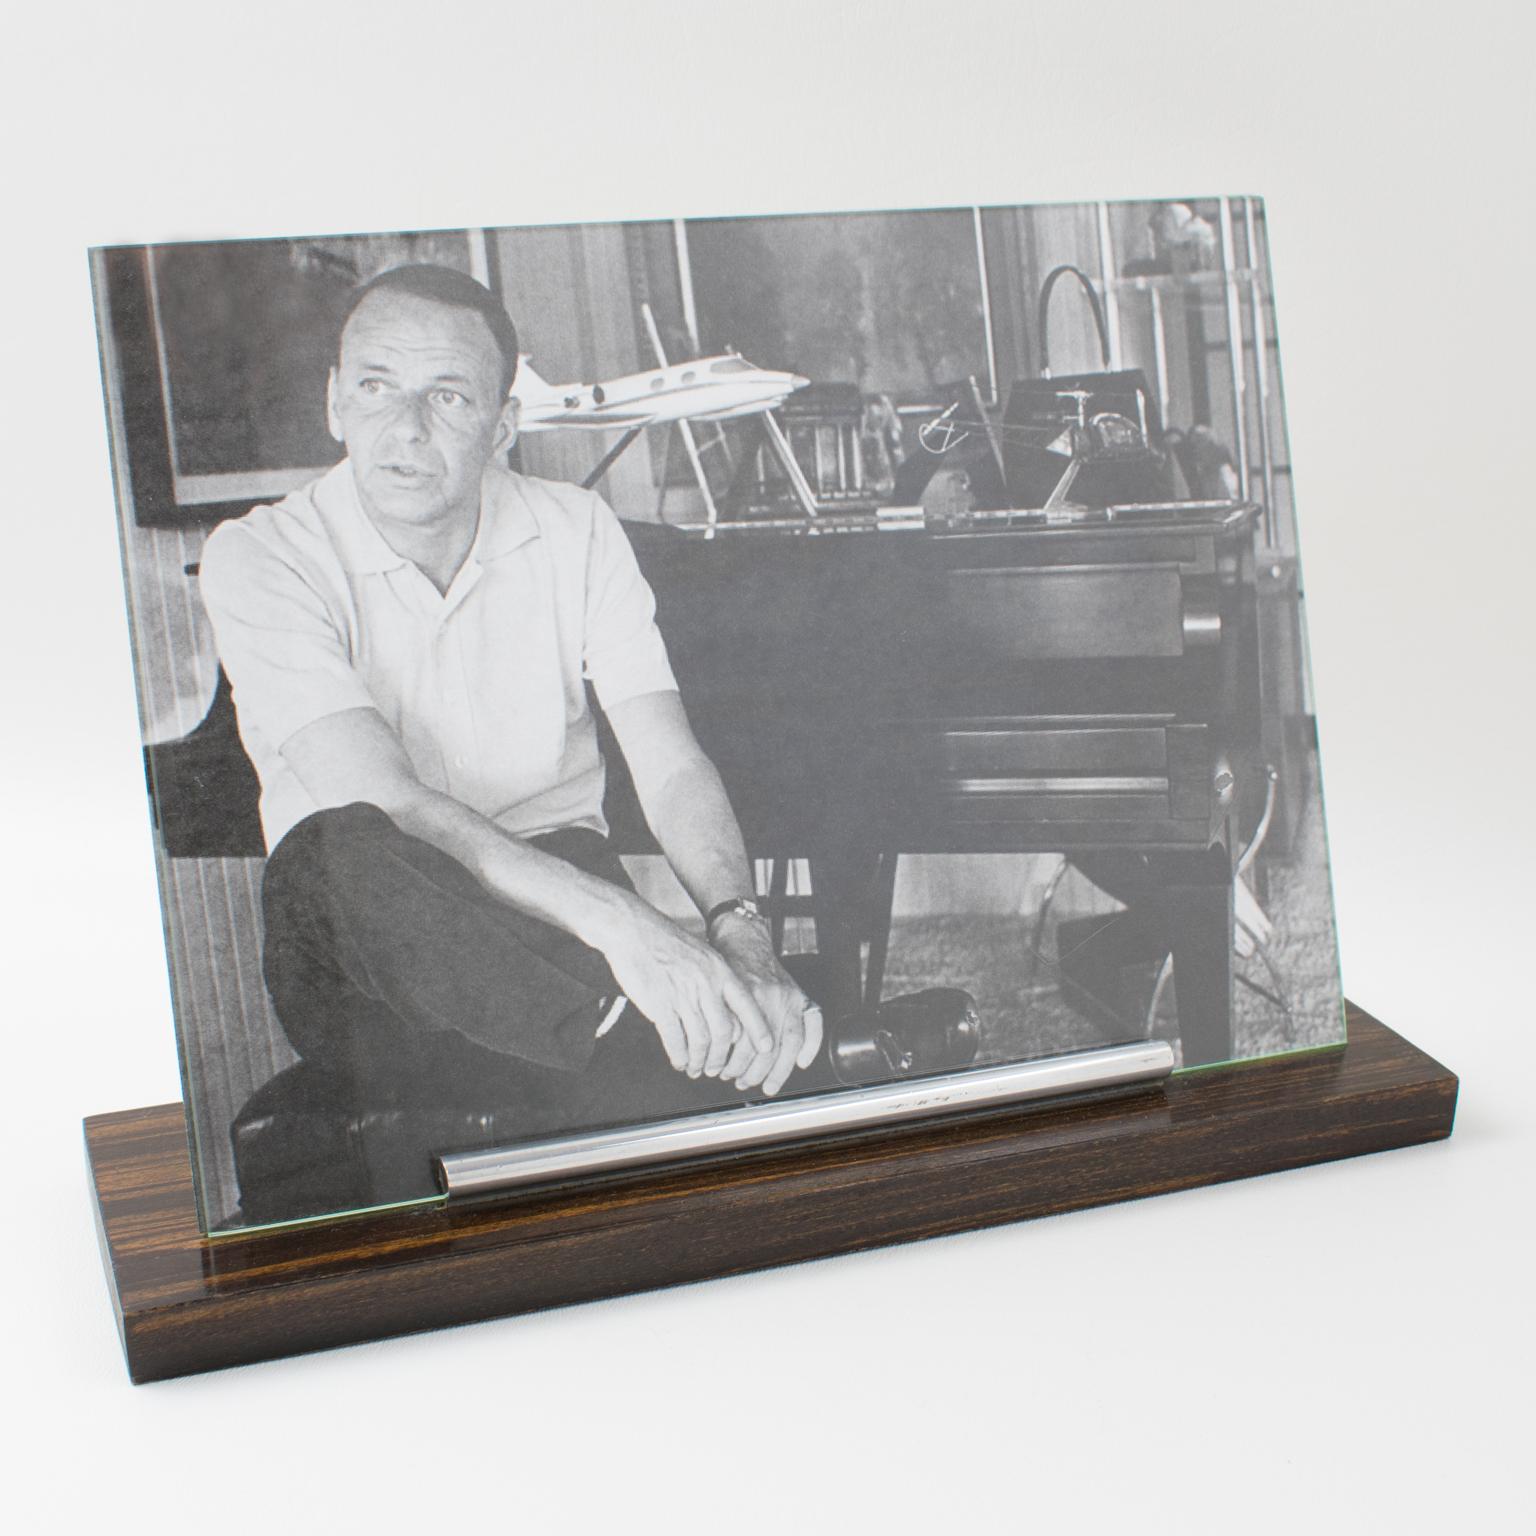 Stylish 1930s Art Deco picture photo frame, featuring thick hand-rubbed wood plinth with Macassar wood pattern and extra-long chromed metal stick. The frame is complete with its two glass sheets to enclose the photograph. The picture can be placed